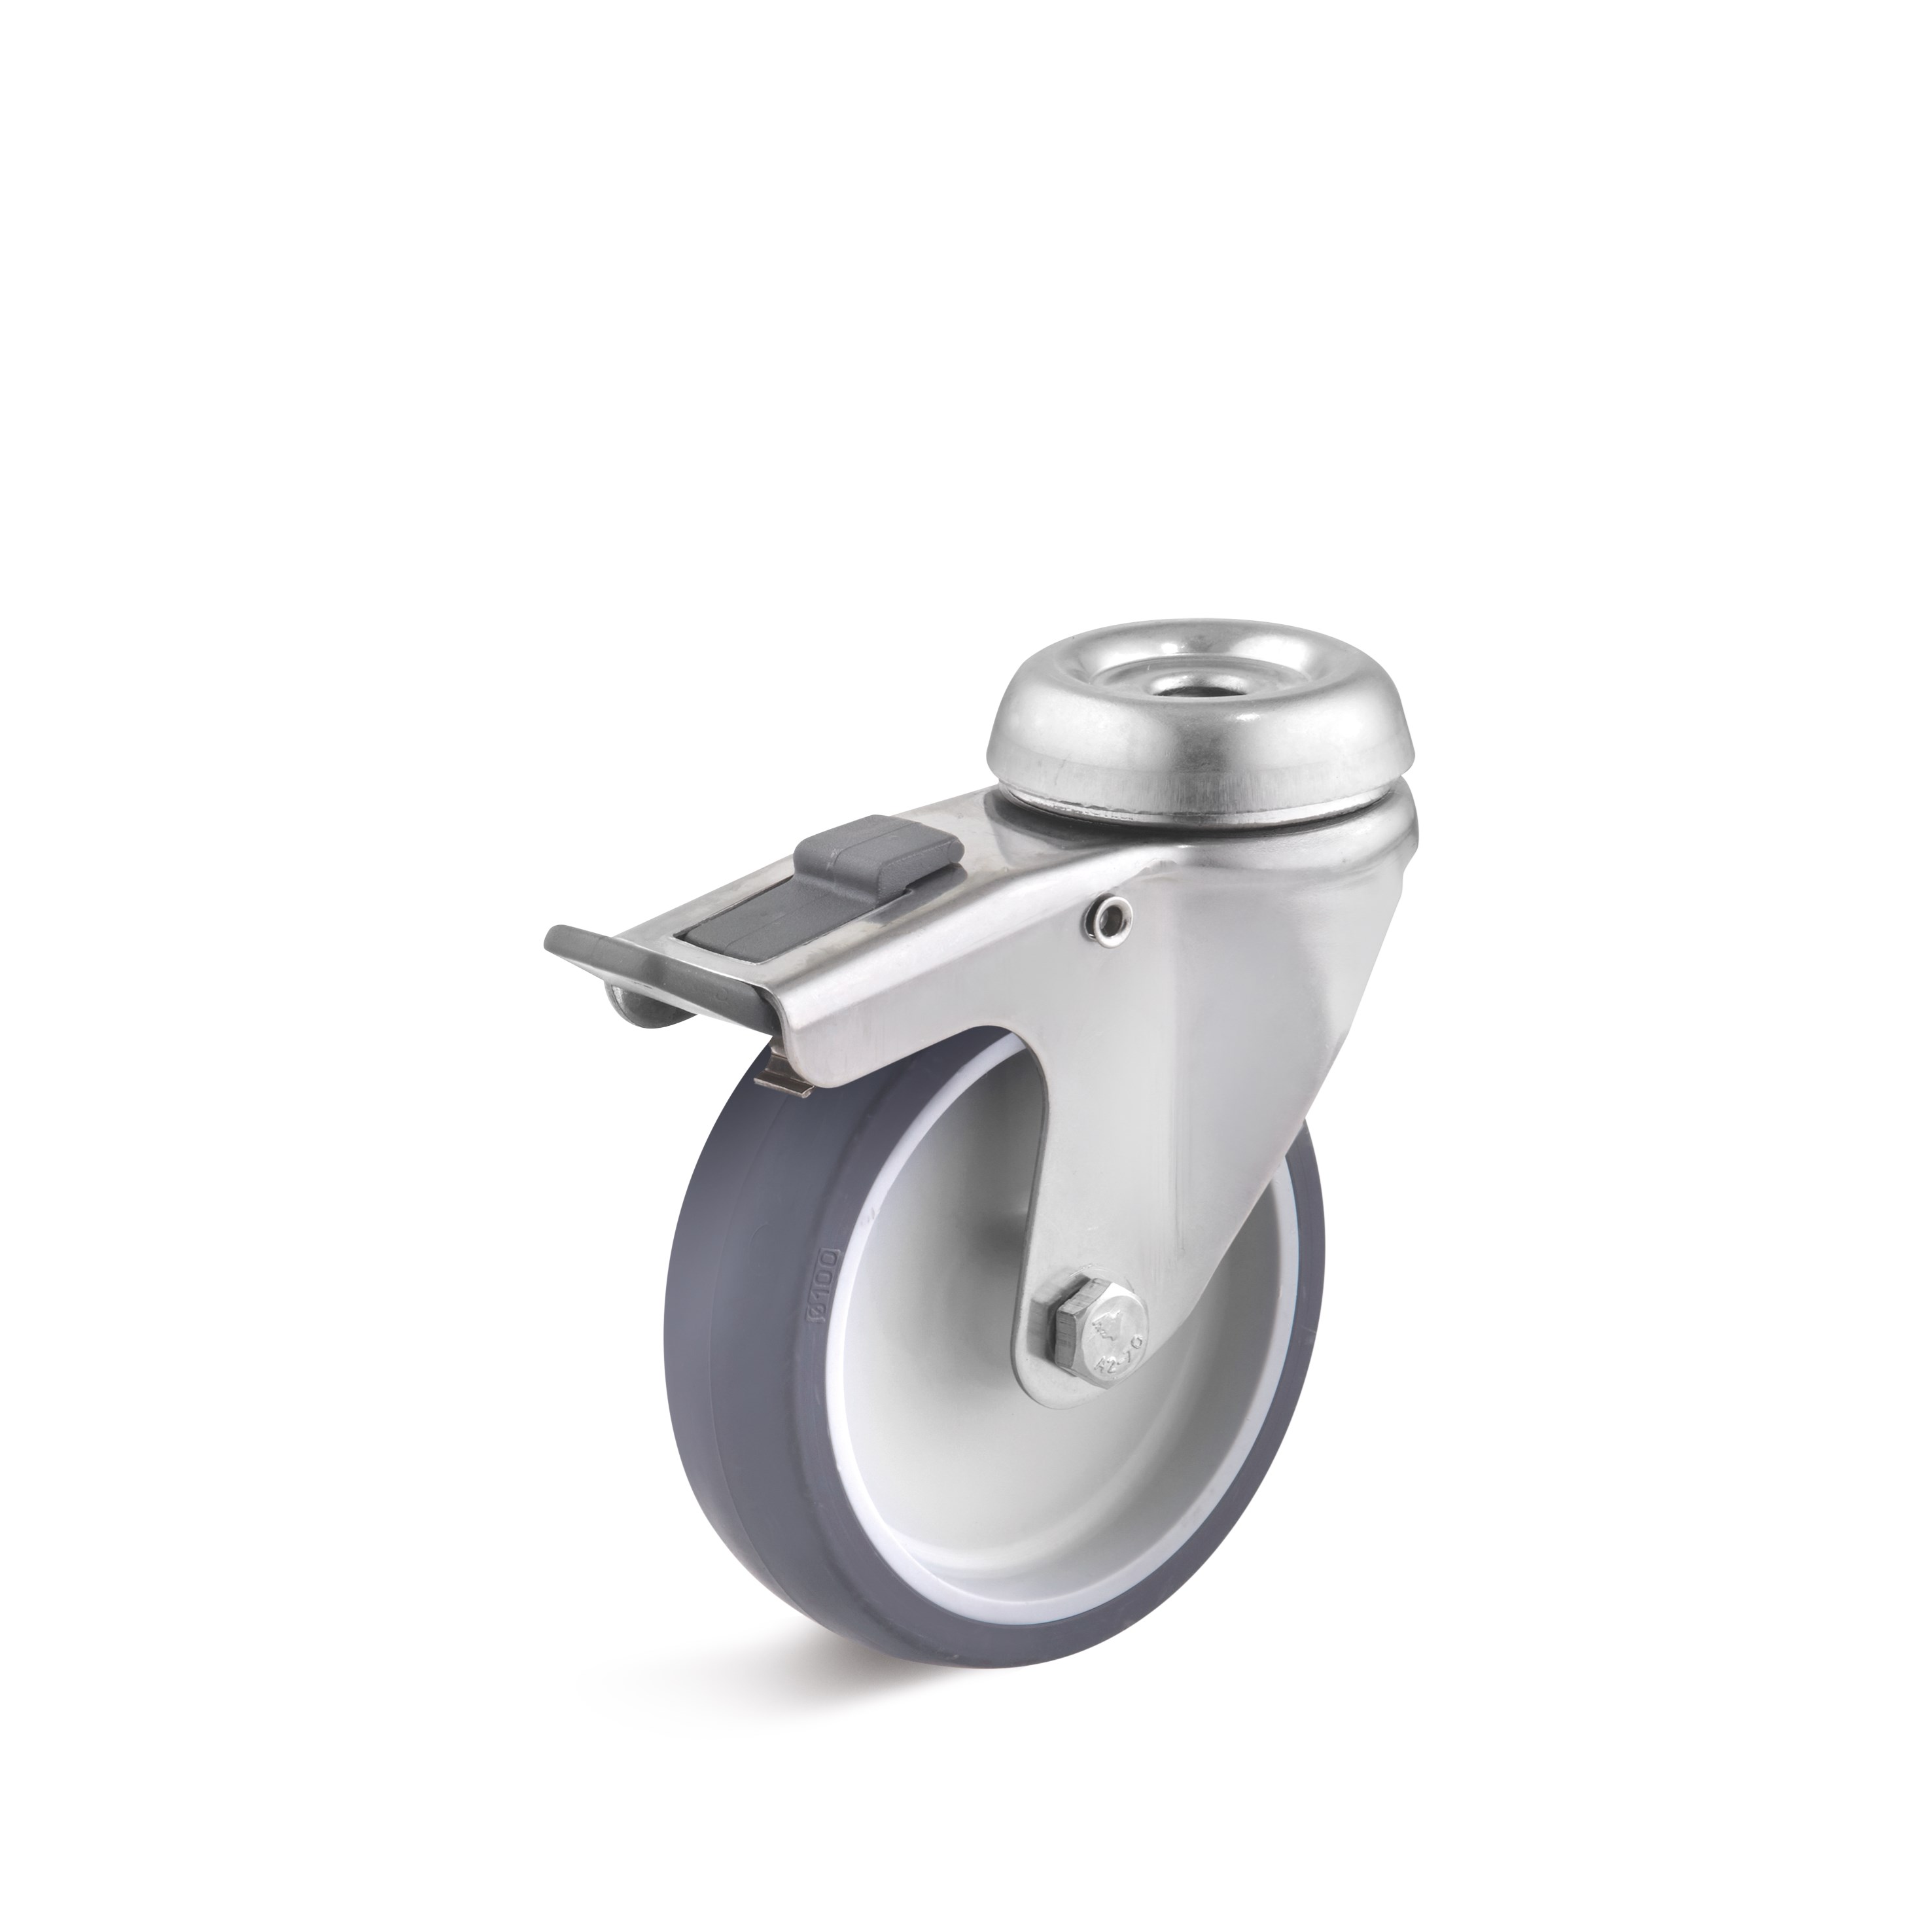 Stainless steel swivel castor with double stop and bolt hole, thermoplastic wheel L-AV-TPGK-100-G-1-DSN